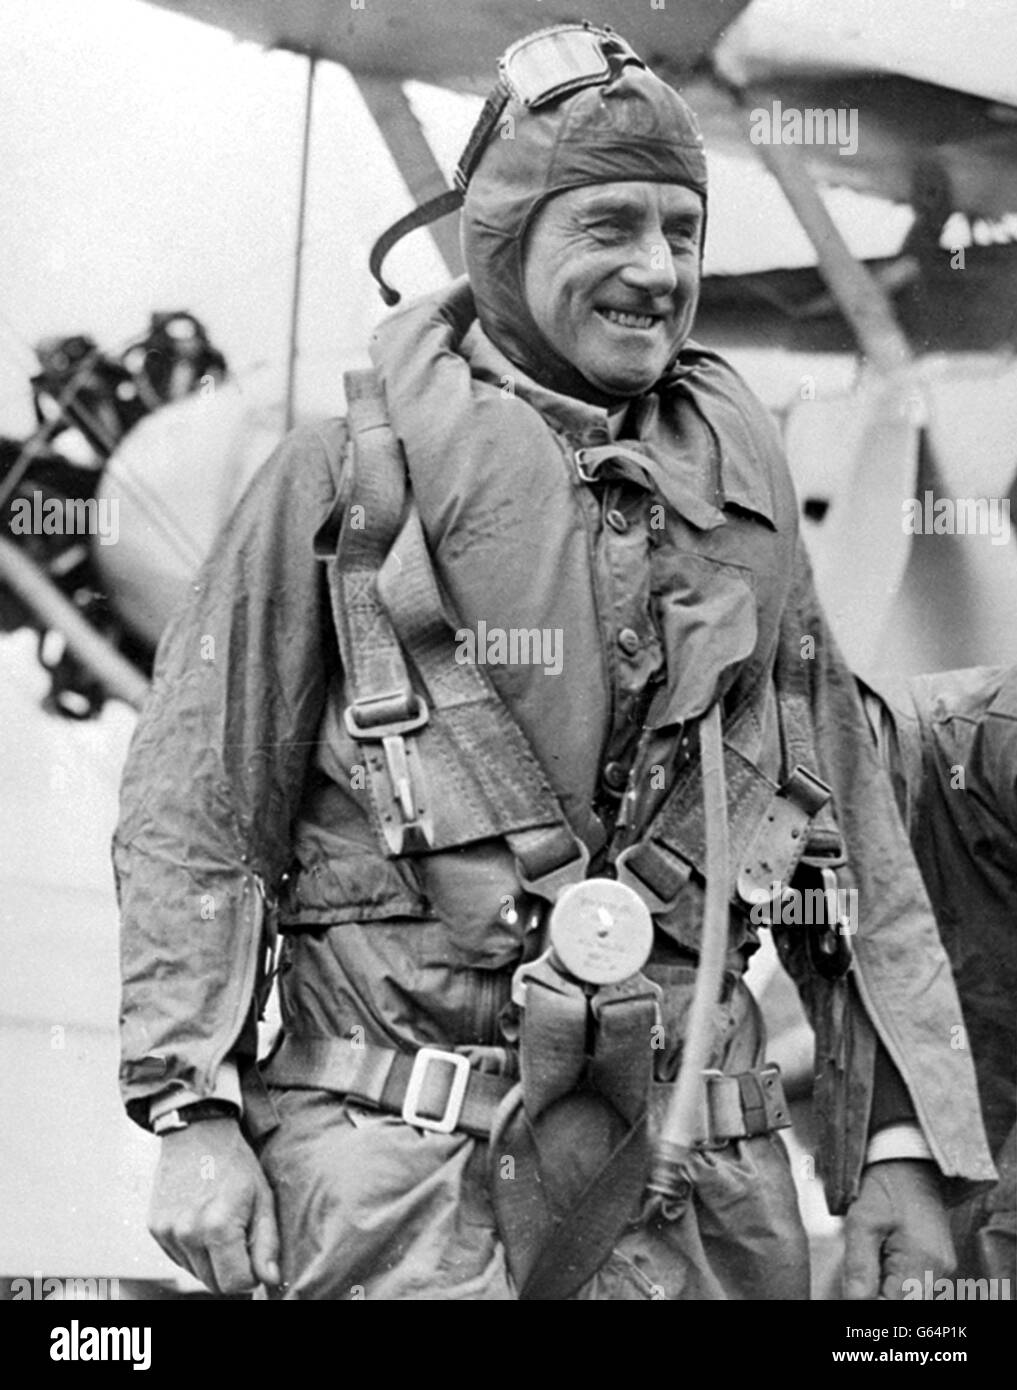 Sir Samuel Hoare, the new Air Minister, photographed in flying kit, ready for a flight. Stock Photo